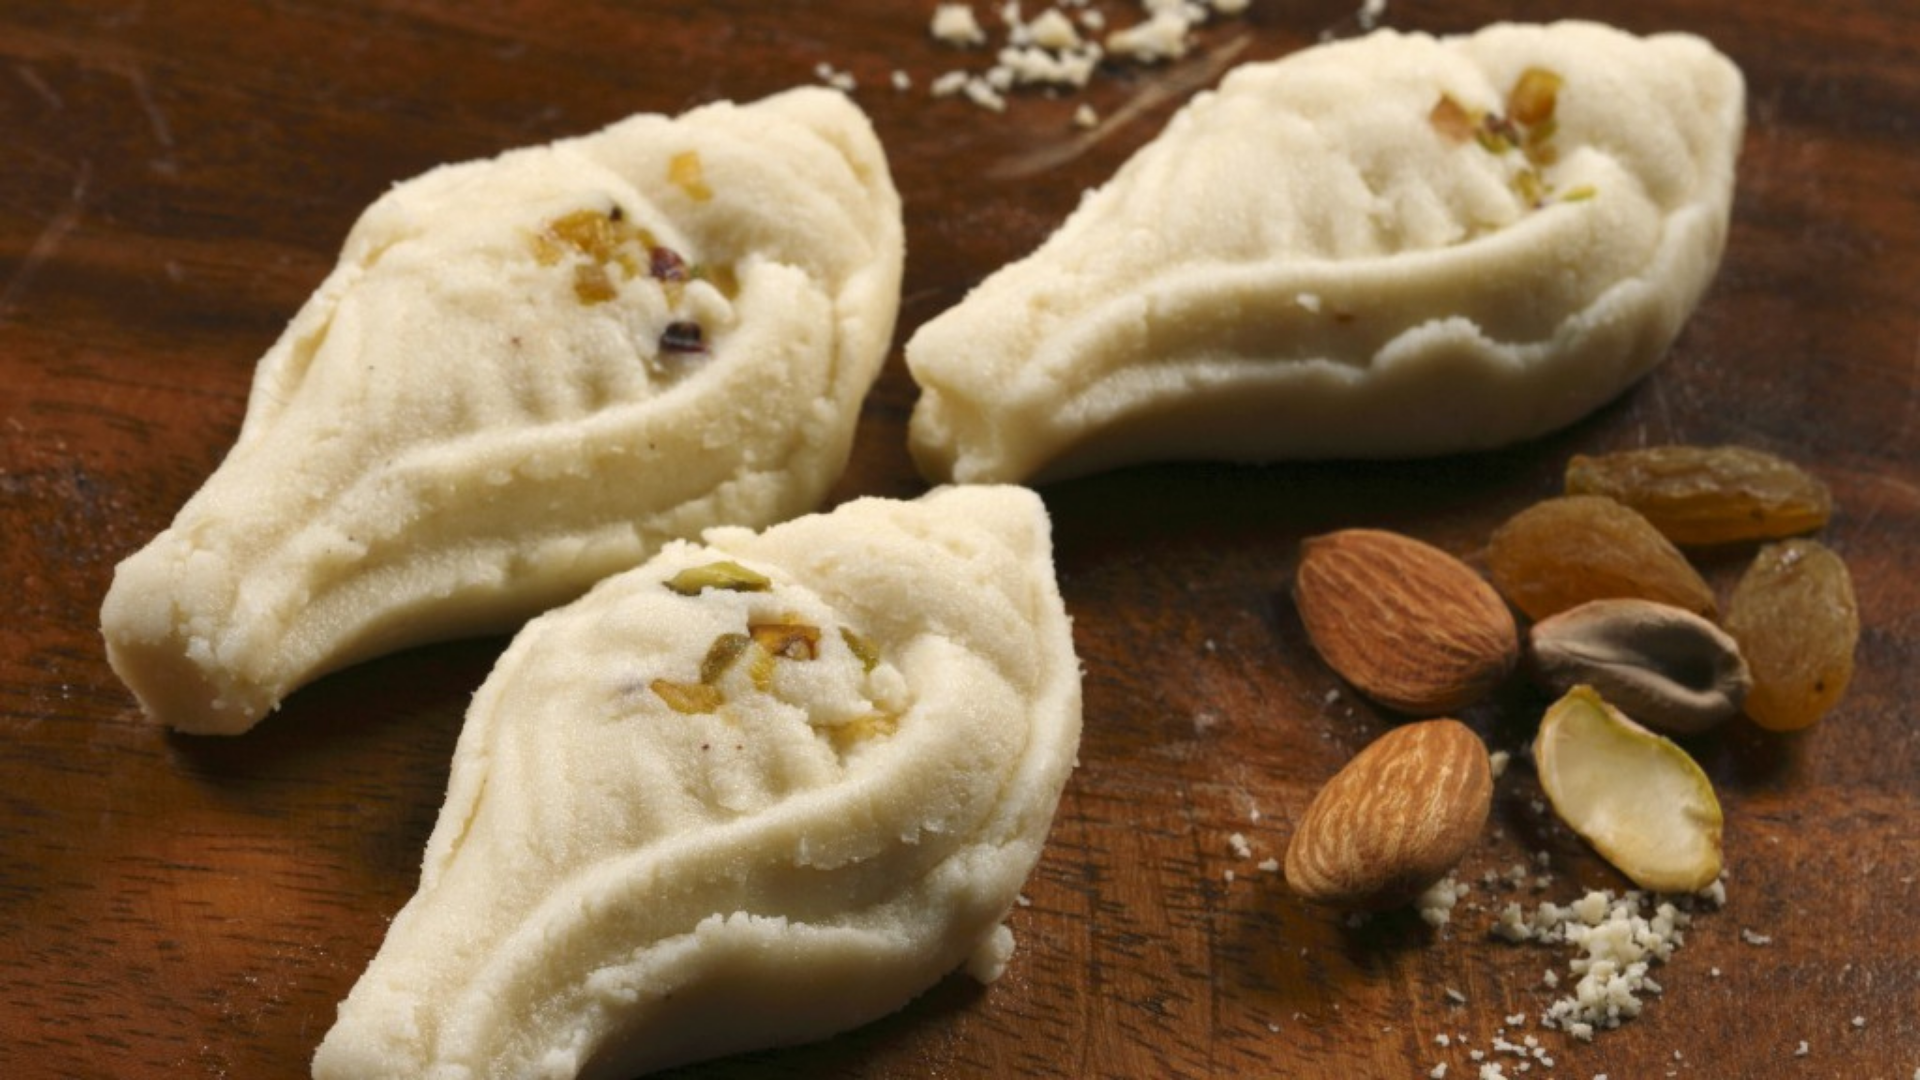 Sandesh is one of the most popular sweets in Bengal